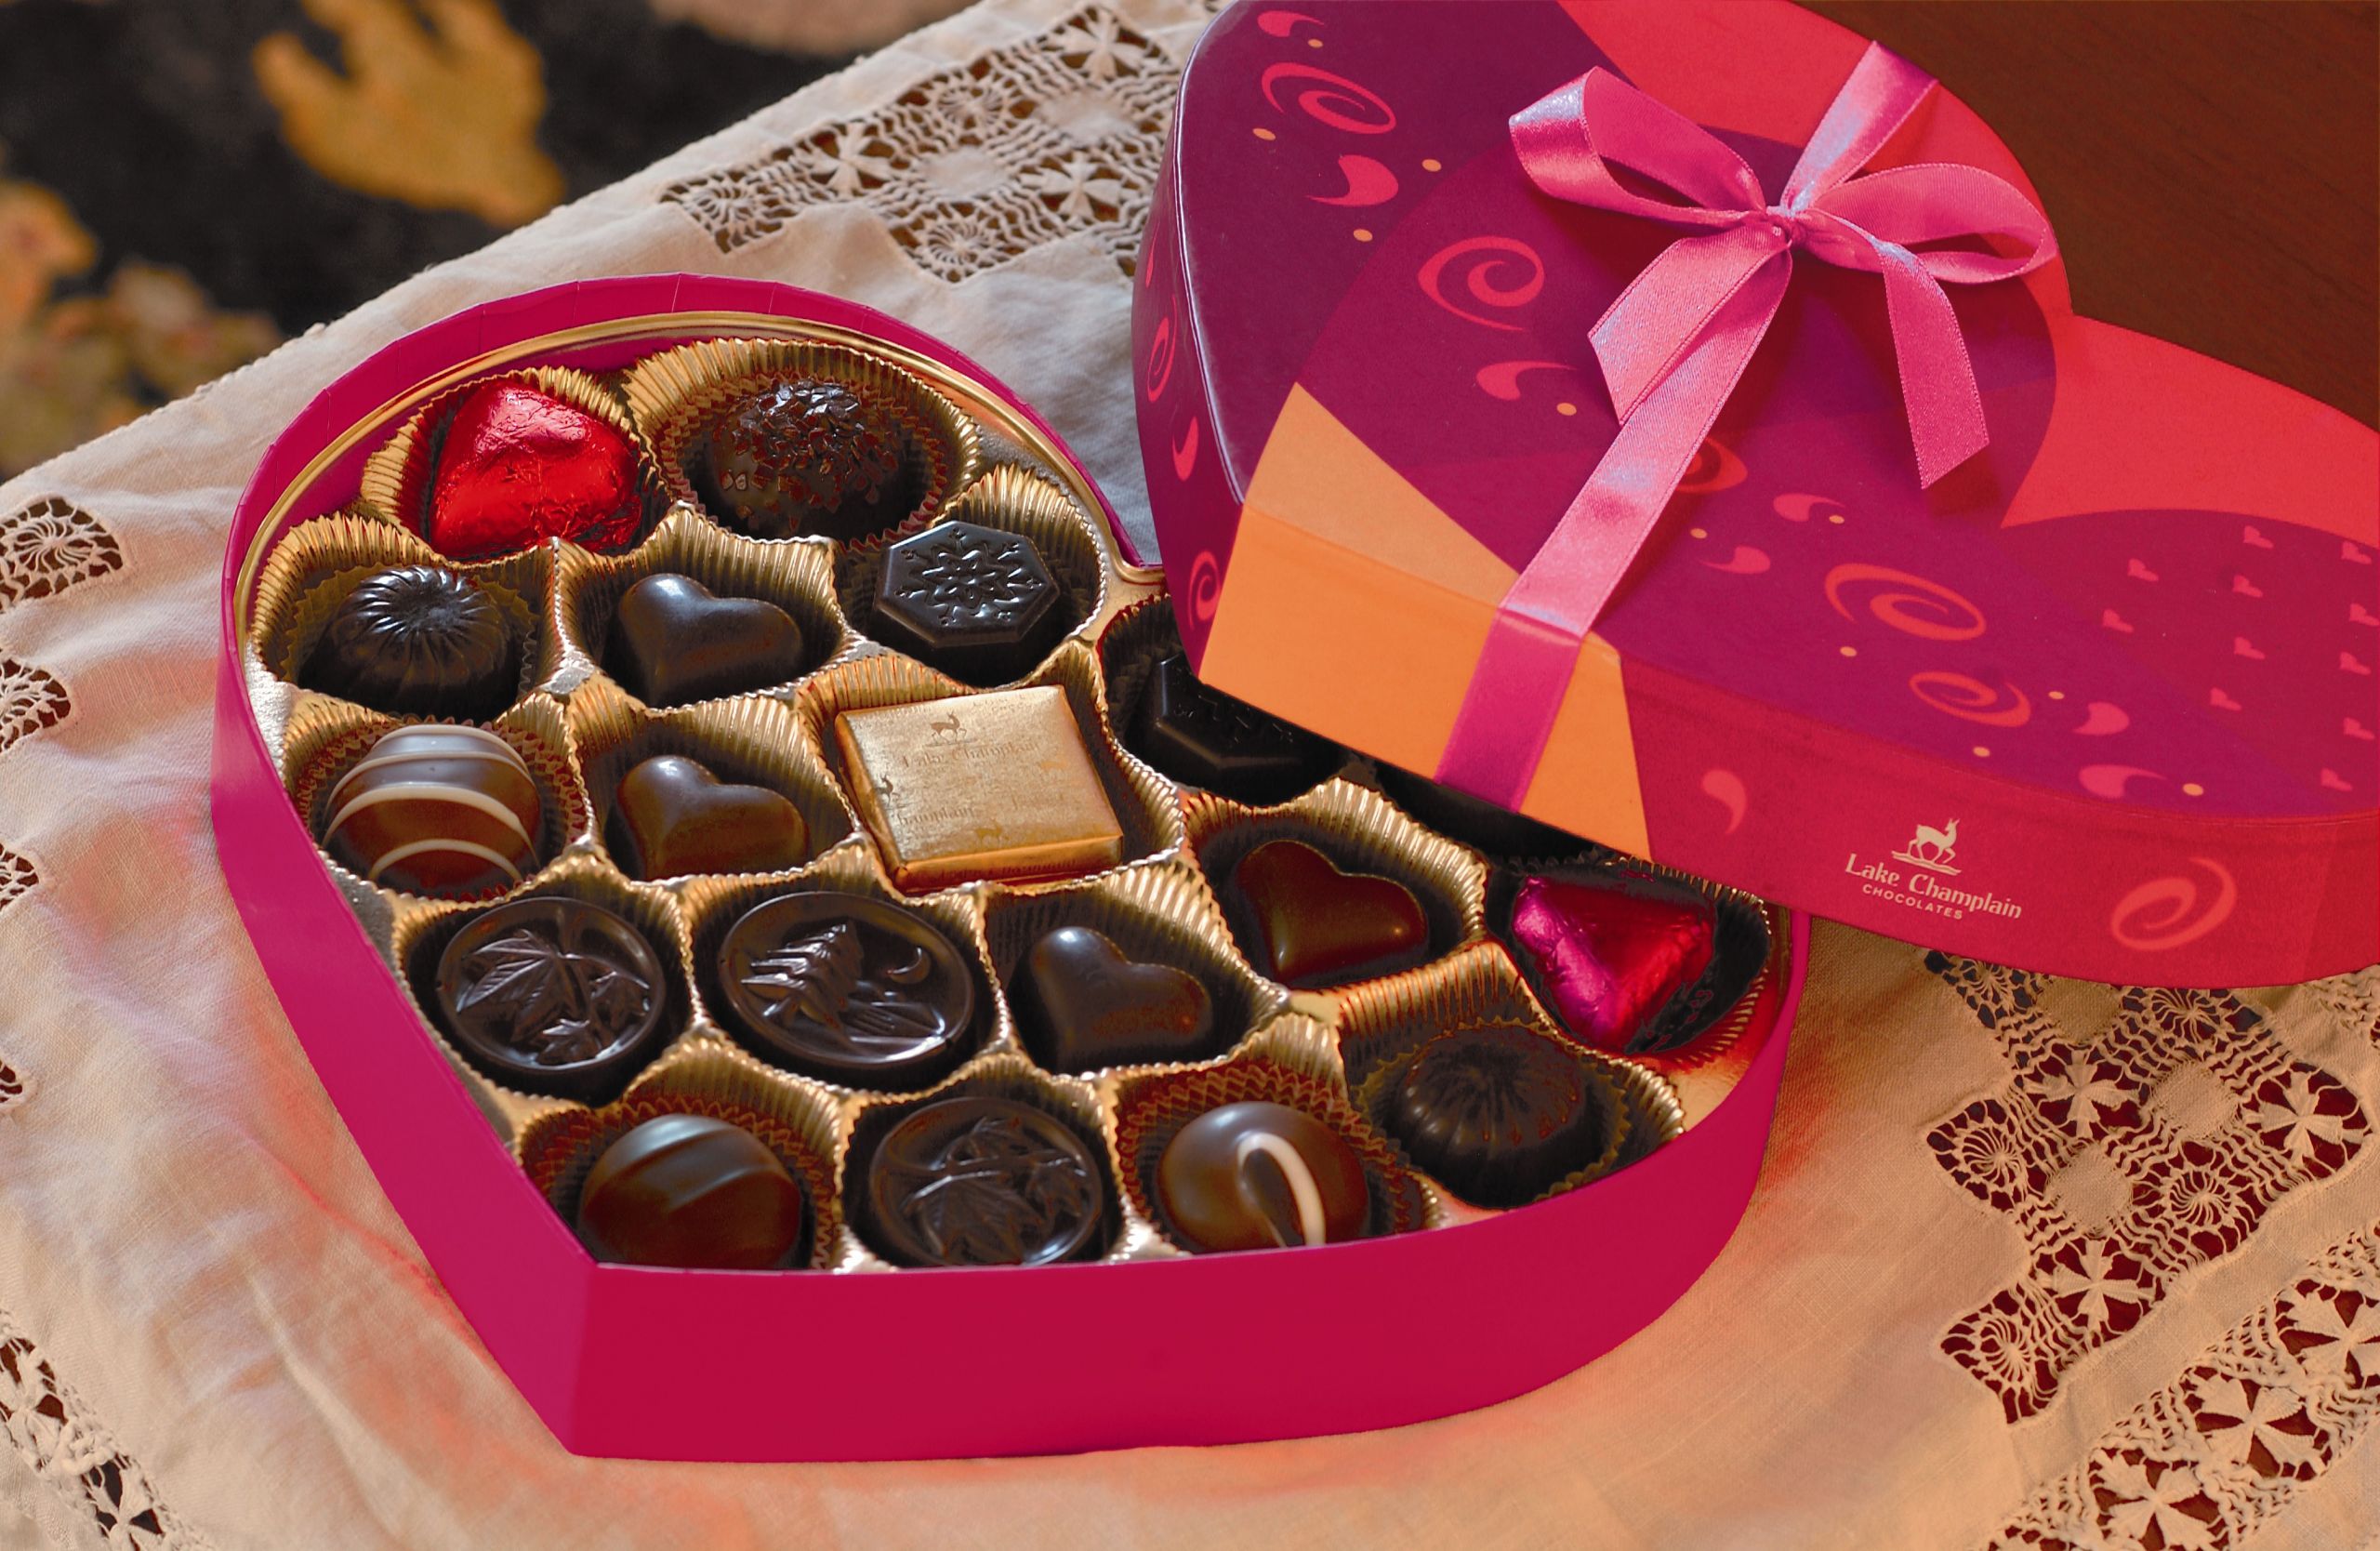 Candy Gift Baskets For Valentines Day
 Lake Champlain Chocolates Introduces Valentine’s Day Gifts